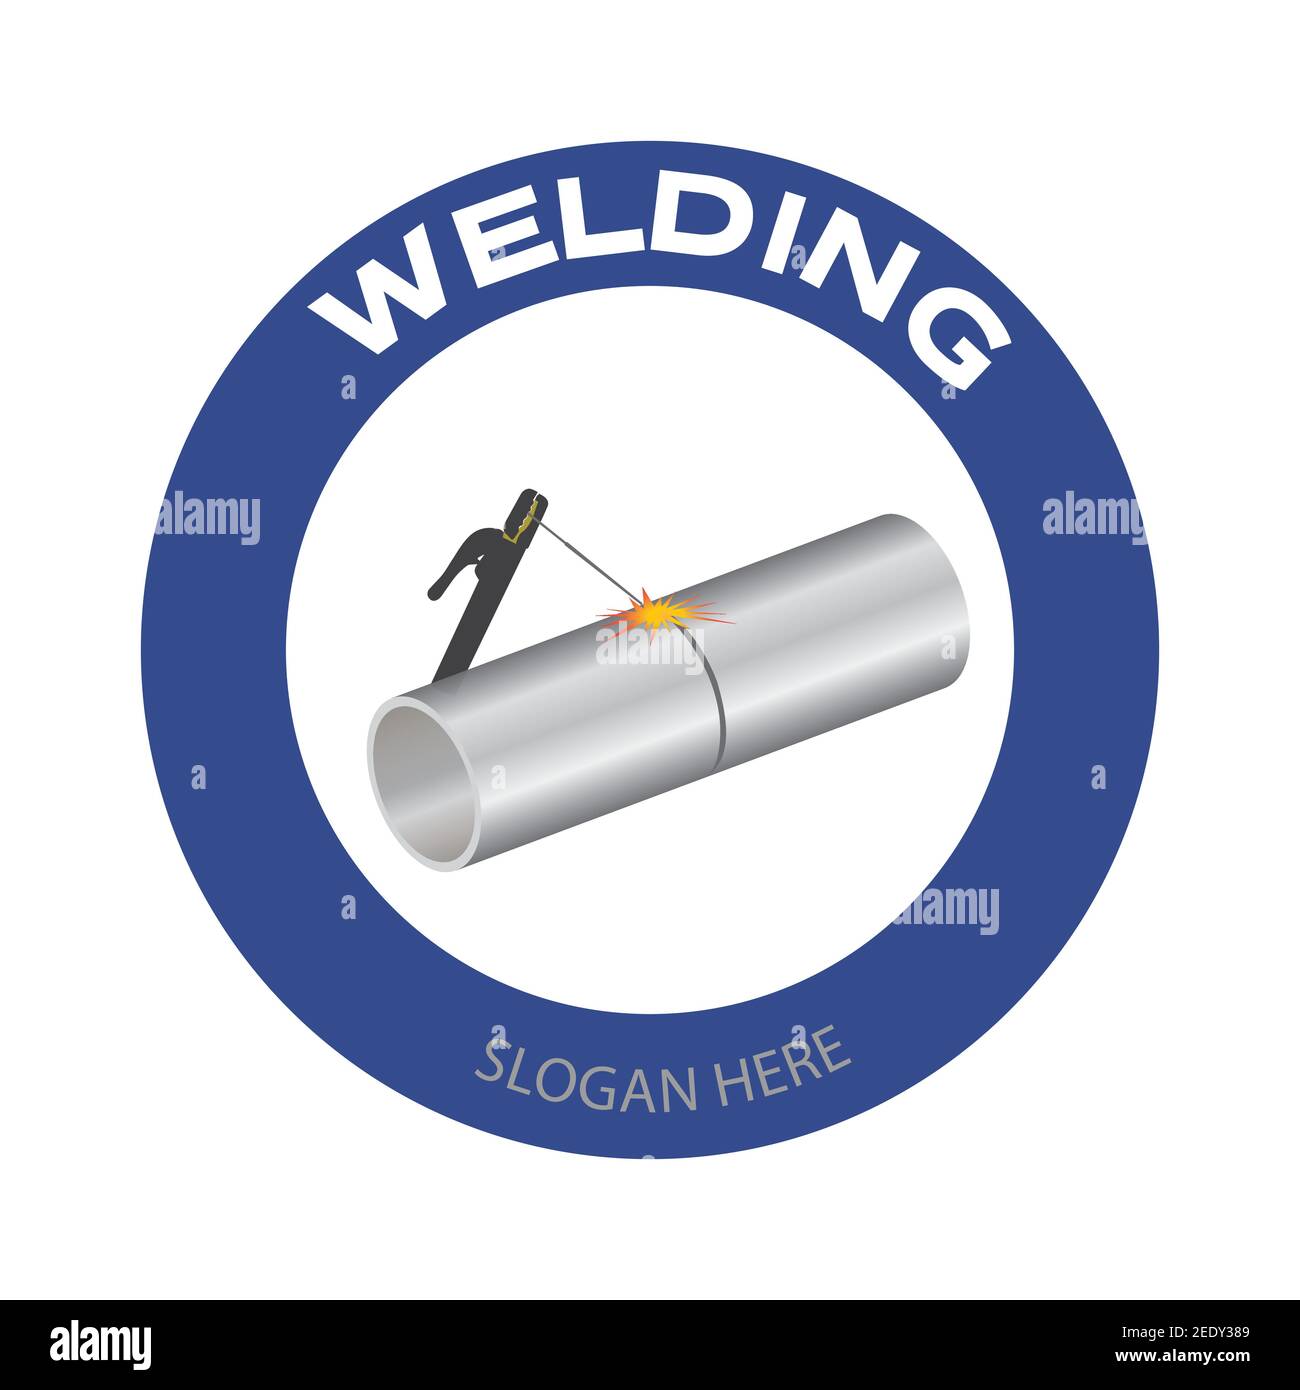 Welding company logo. Welding torch and tube with spark on white background. Vector illustration construction badge design. Stock Vector